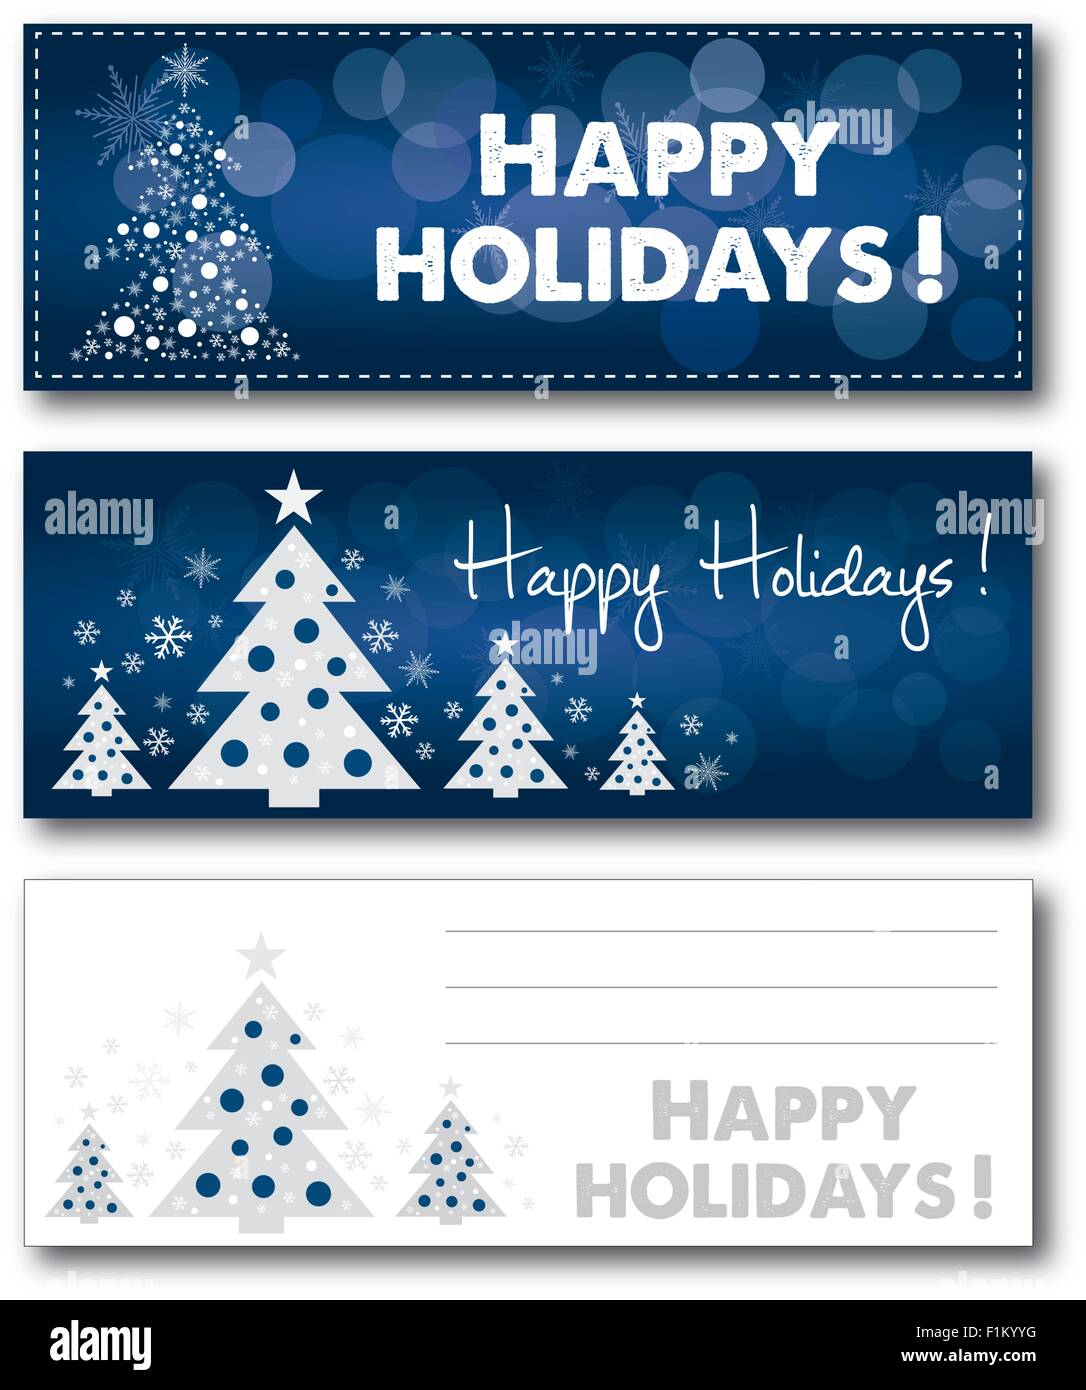 Happy Holiday christmas blue banner vector illustration Stock Vector